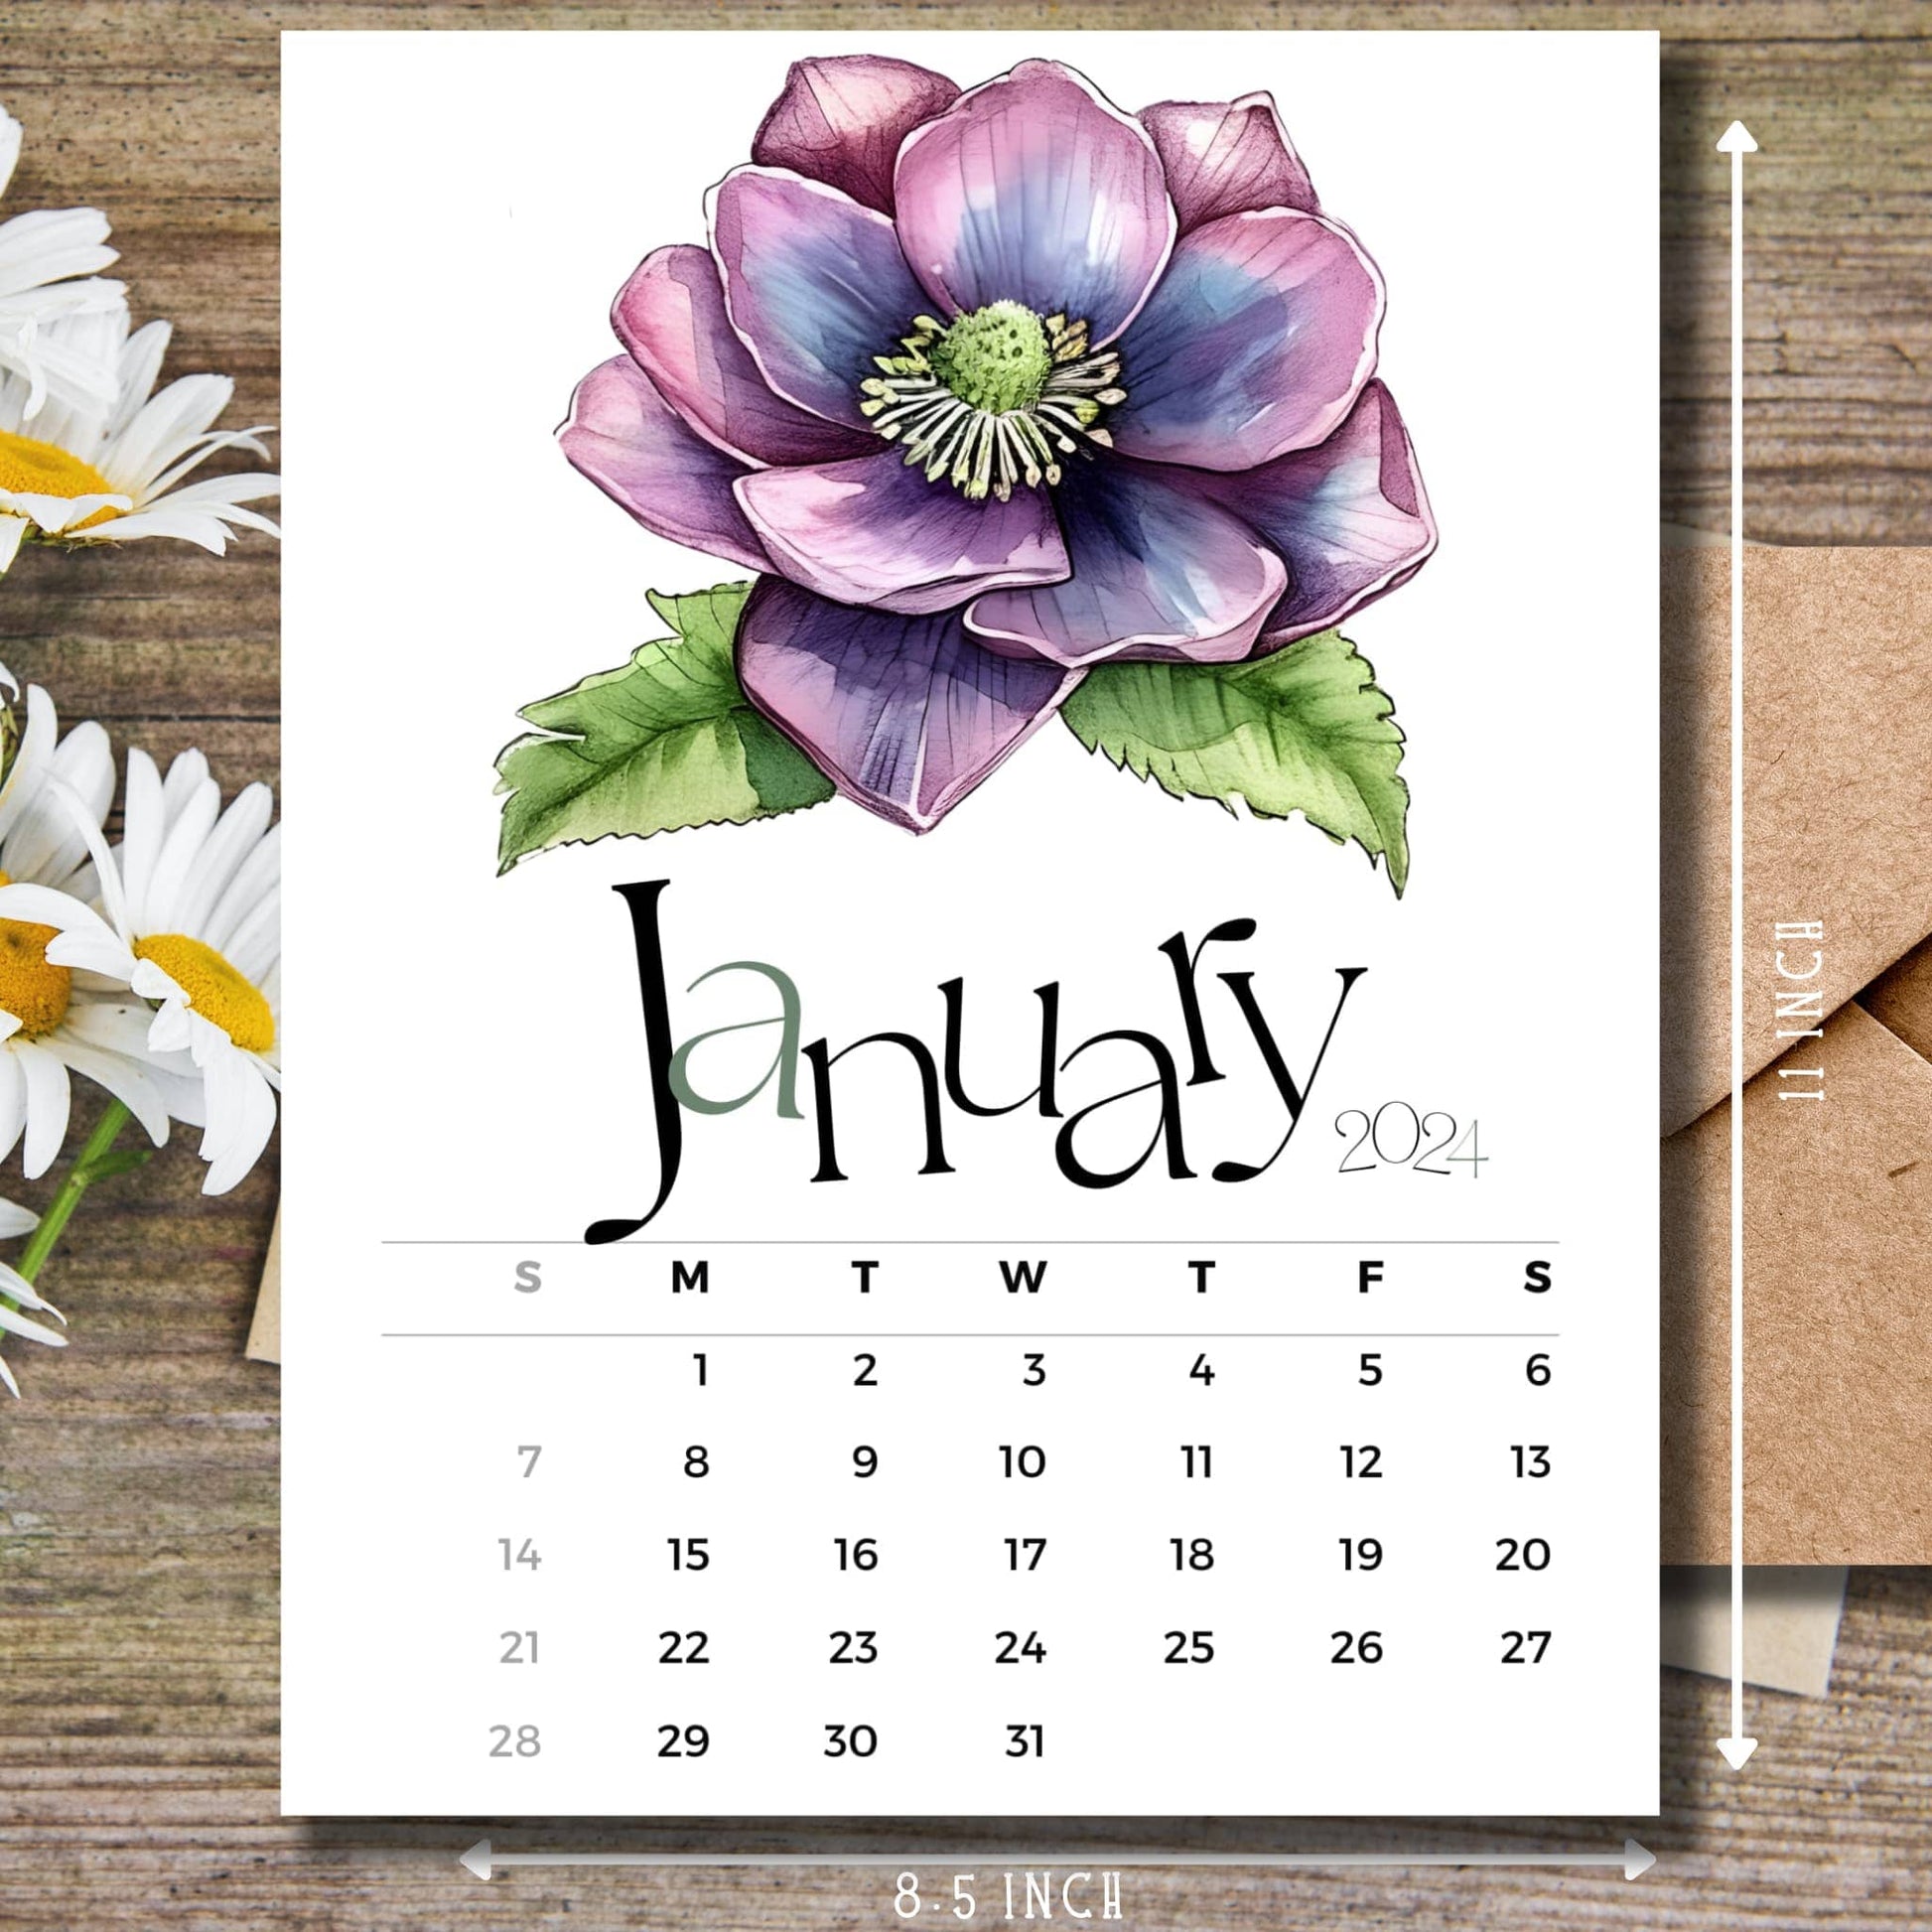 January 2024 Hellebores floral calendar on wooden desk with white flowers and size guide.